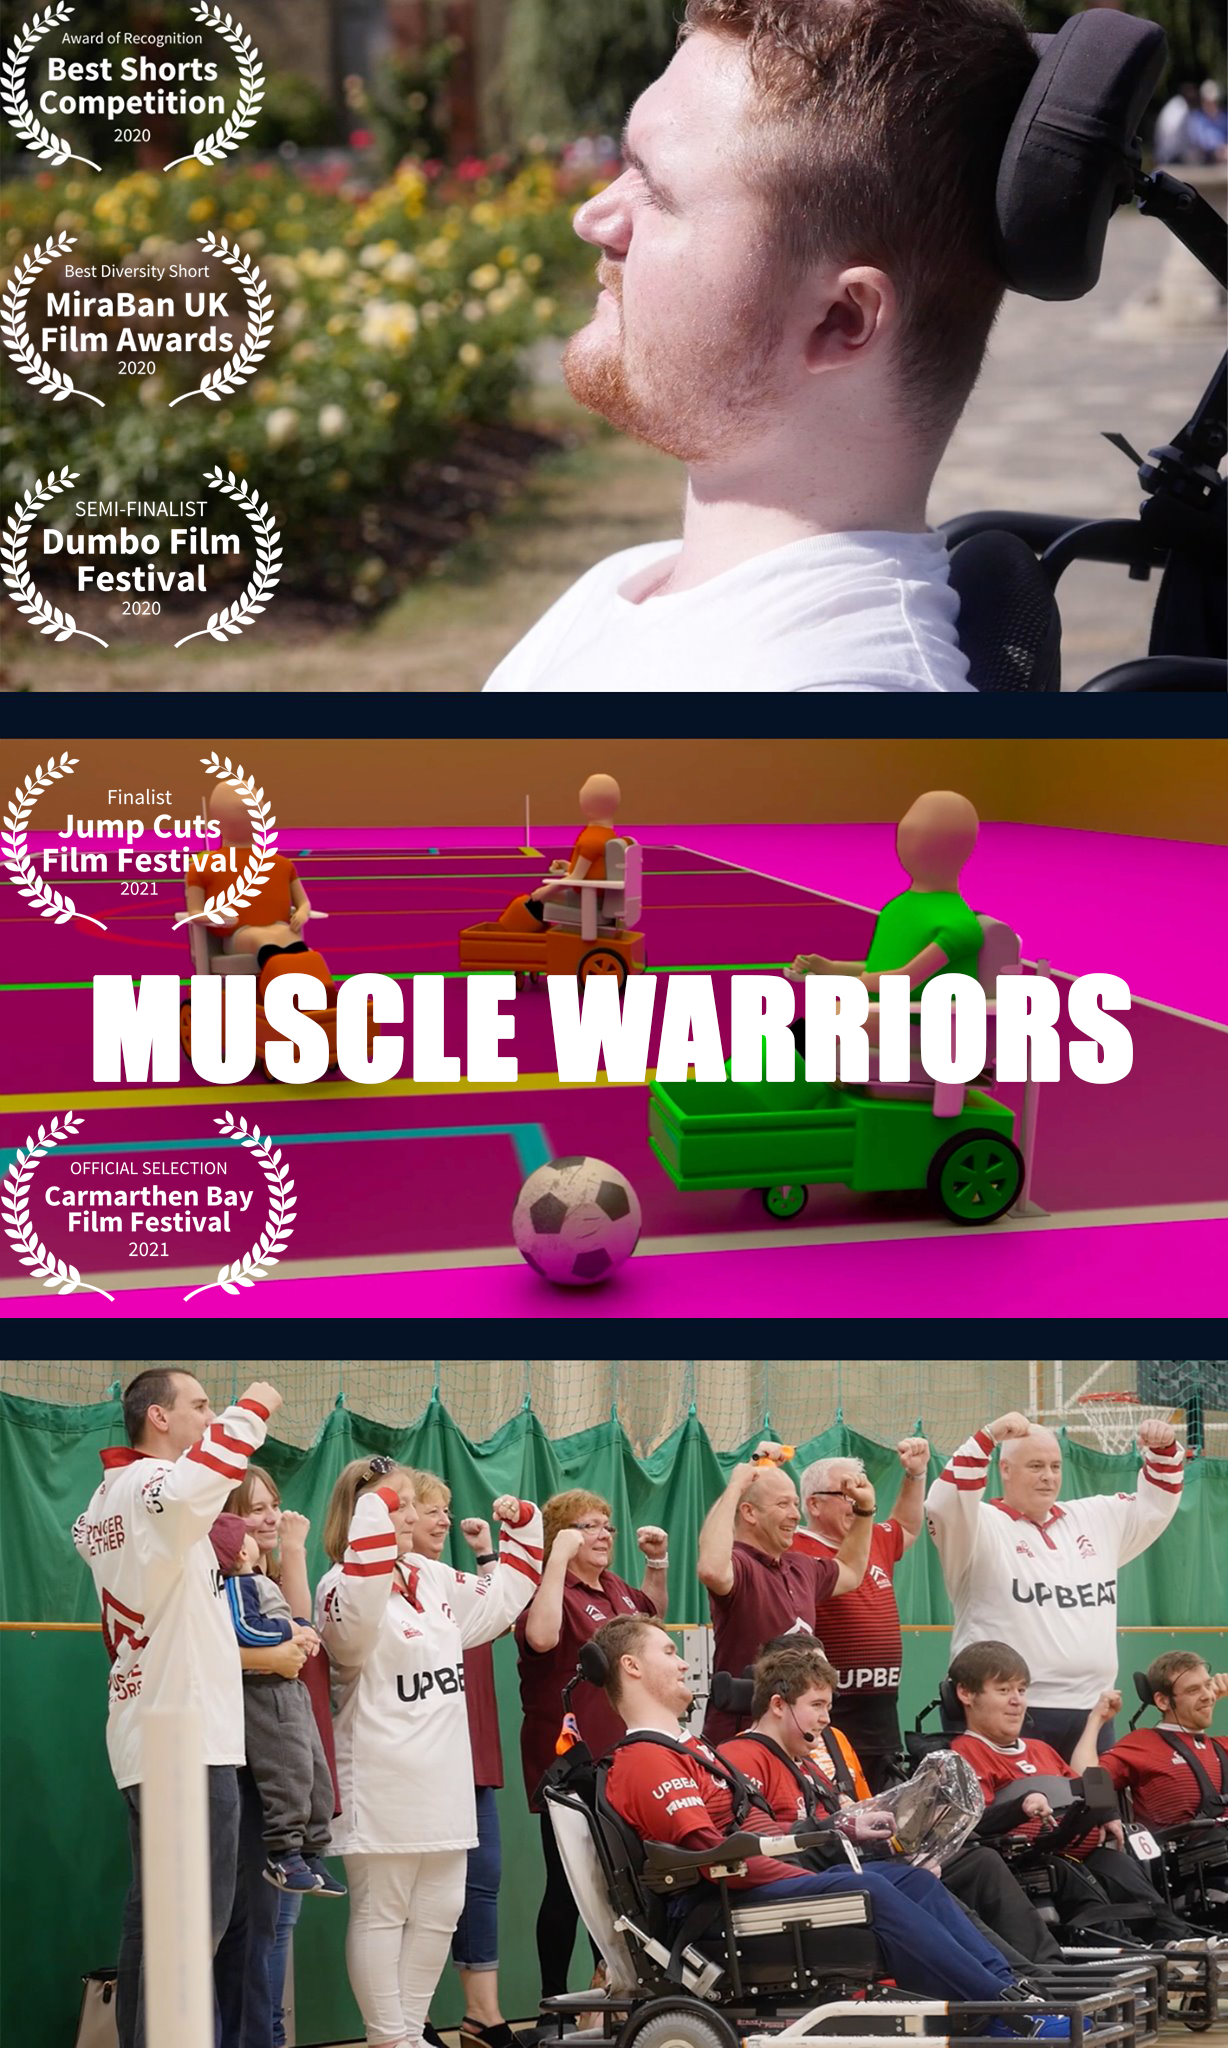 Muscle Warriors poster - featuring Ryan O'Leary who is a powerchair football player